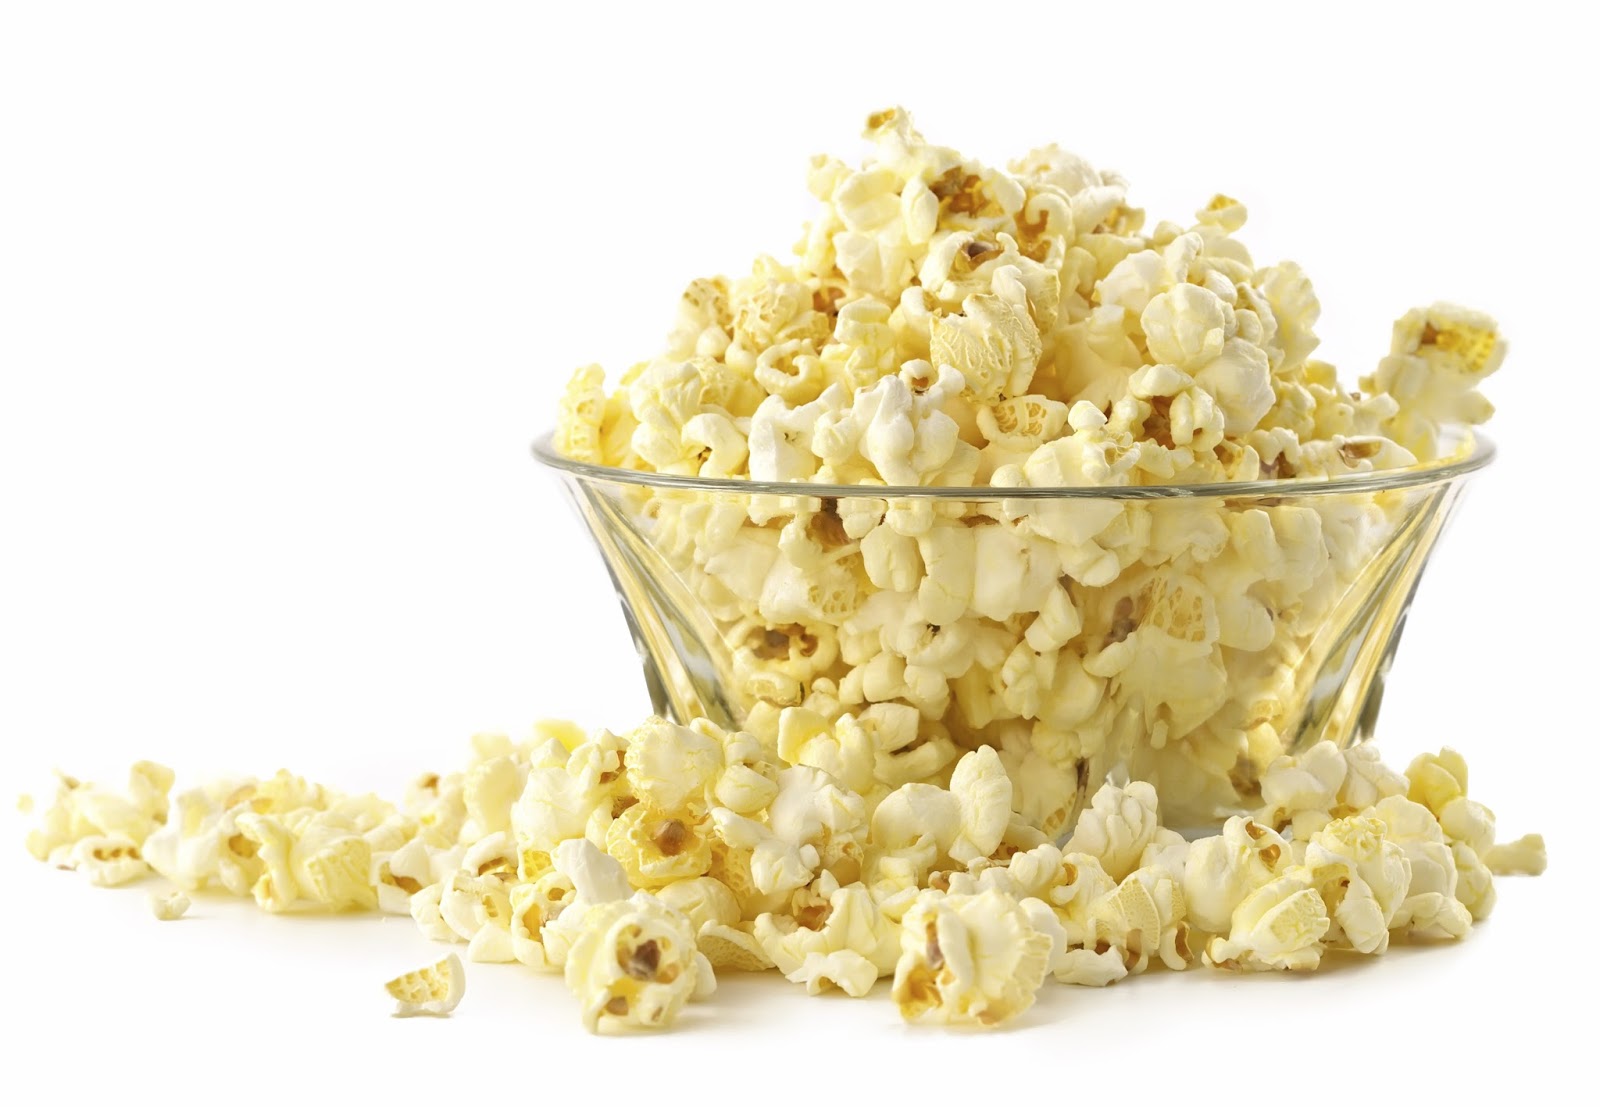     Fitness  Champion Performance Recipe Of The Week   Protein Popcorn